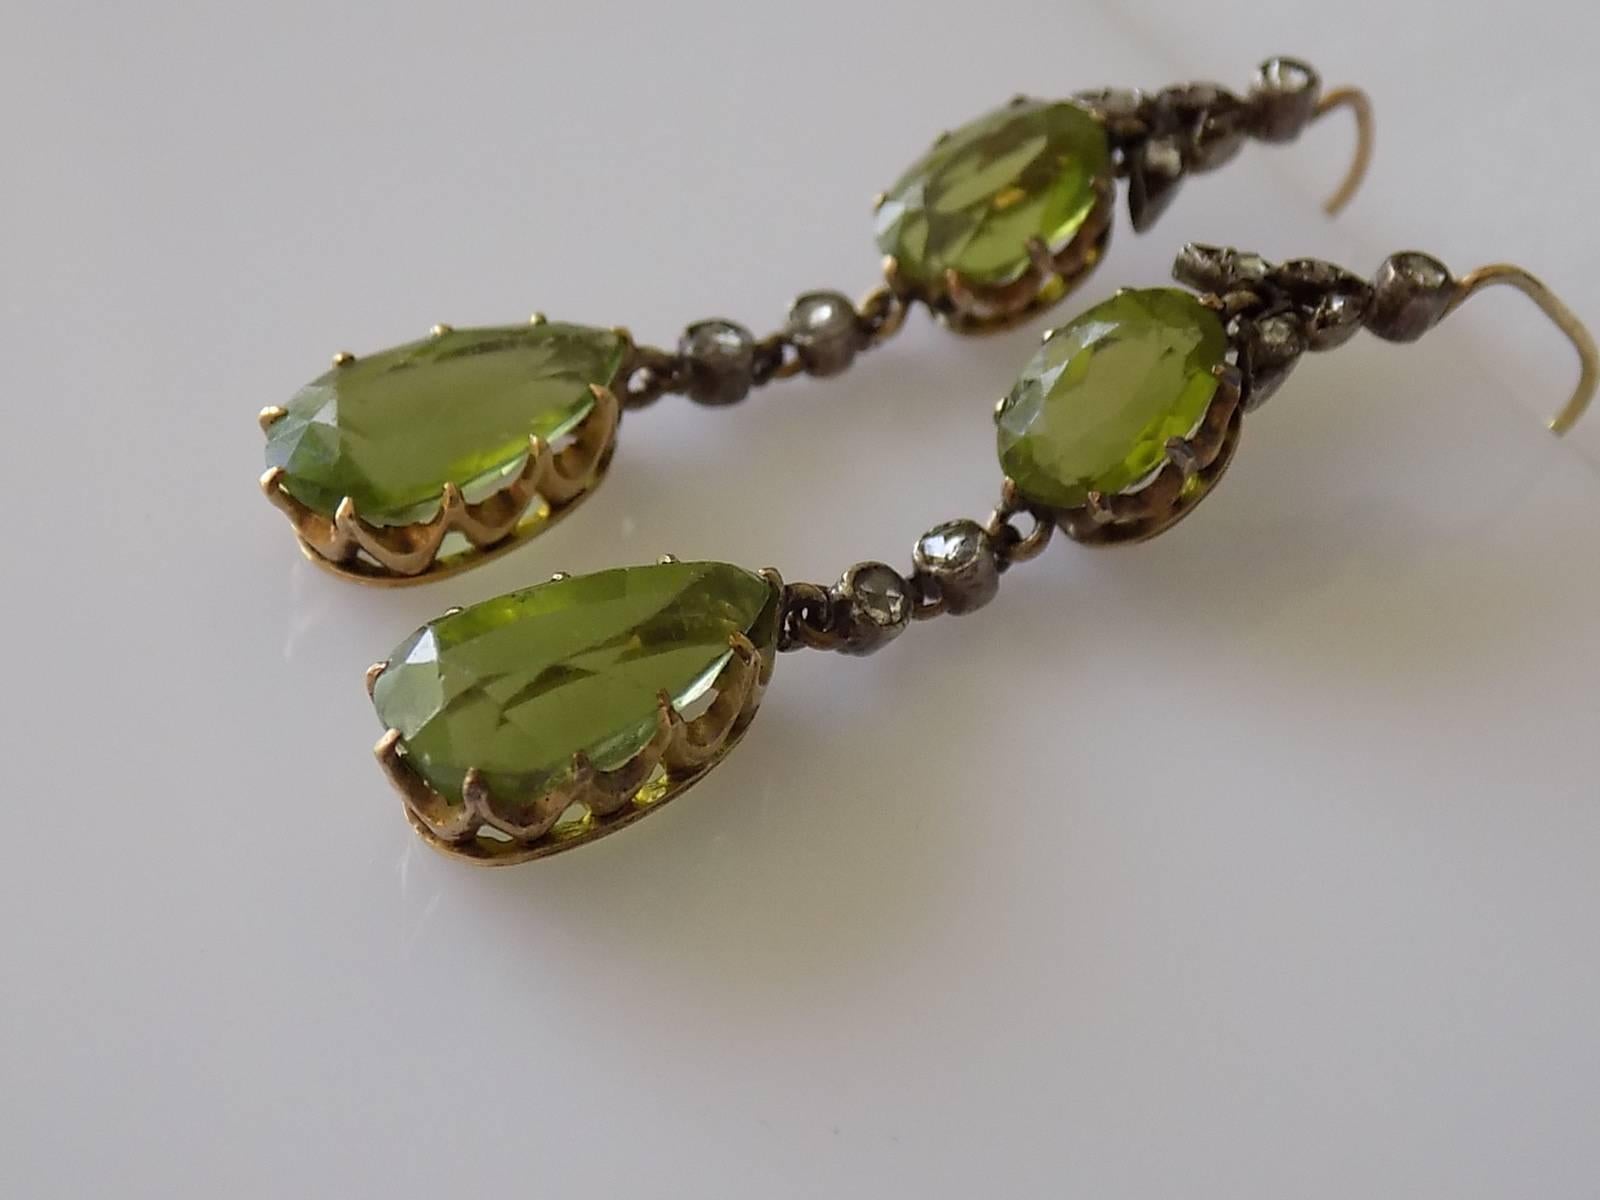 A Spectacular Victorian c.1890 18 Carat Gold and approx. 6.6 Carat Peridot drop earrings with a rose cut diamonds mounted in solid silver. The earrings look outstanding when worn. English origin.
Total Drop including hooks 44mm.
Top Peridots 6.1mm x